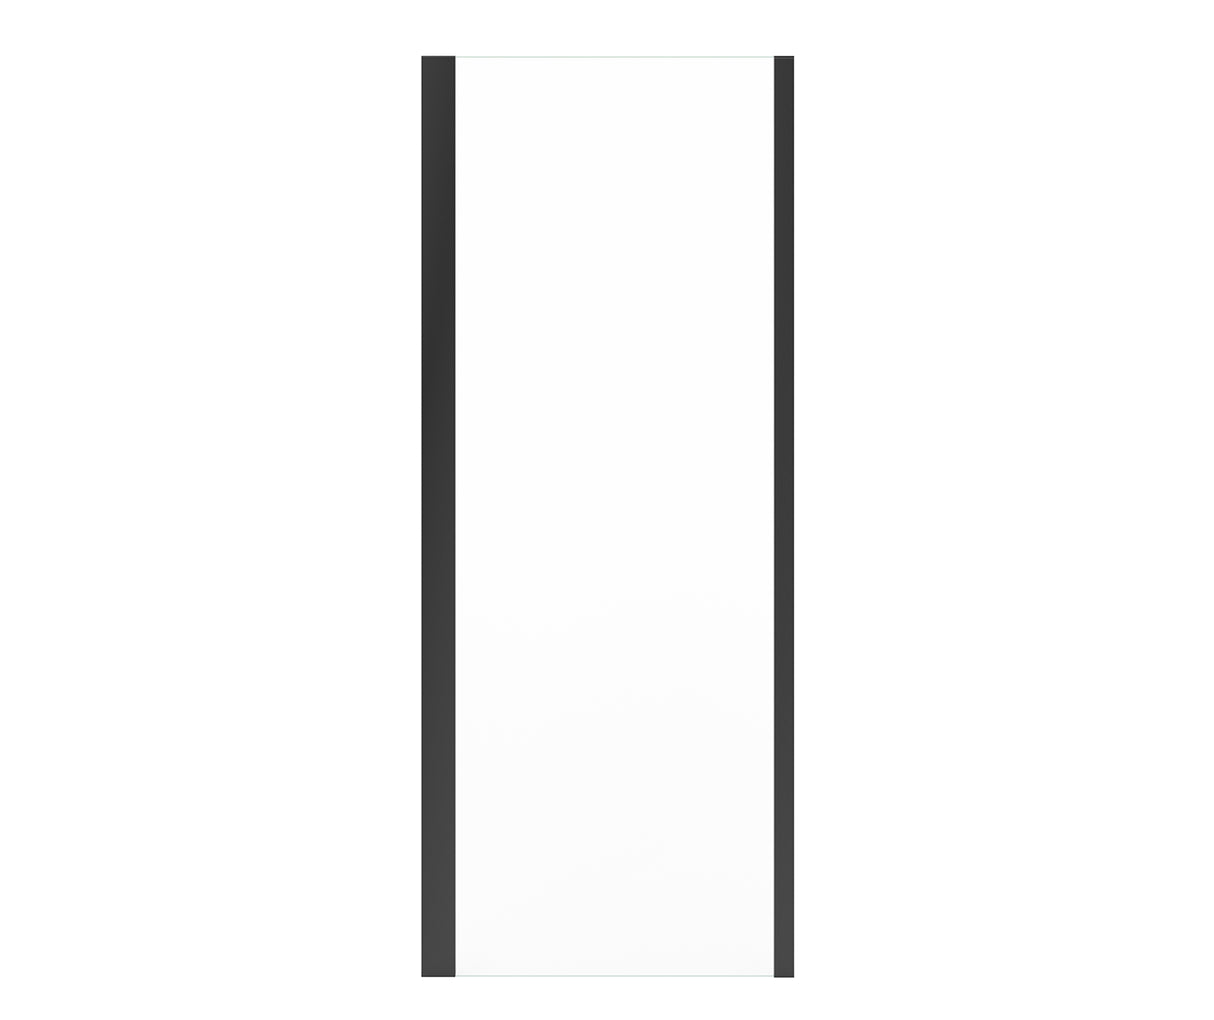 MAAX 135327-900-340-000 Uptown Return Panel for 32 in. Base with Clear glass in Matte Black